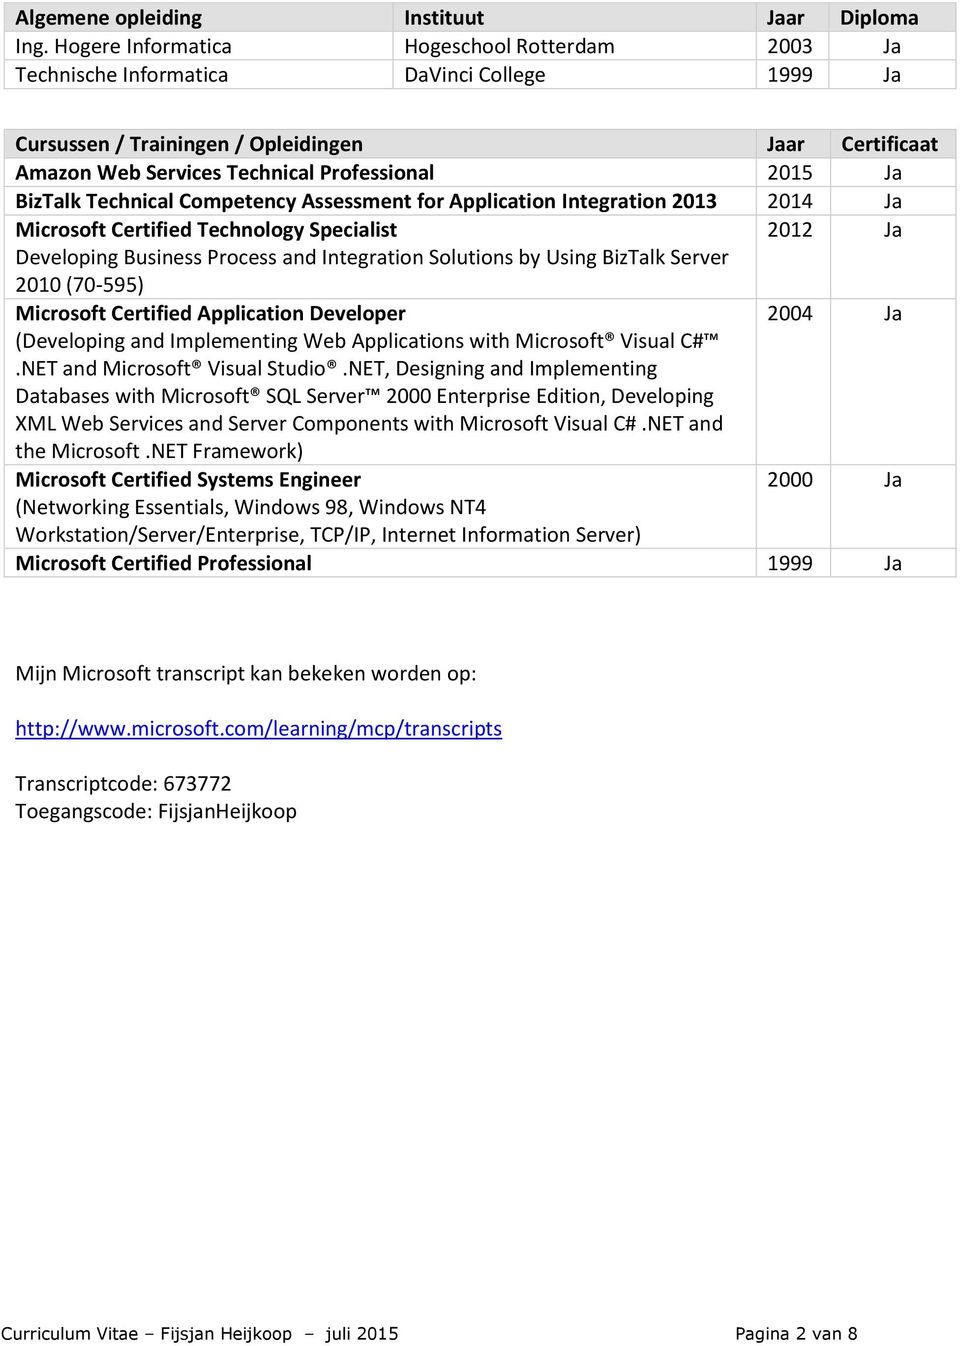 BizTalk Technical Competency Assessment for Application Integration 2013 2014 Ja Microsoft Certified Technology Specialist 2012 Ja Developing Business Process and Integration Solutions by Using